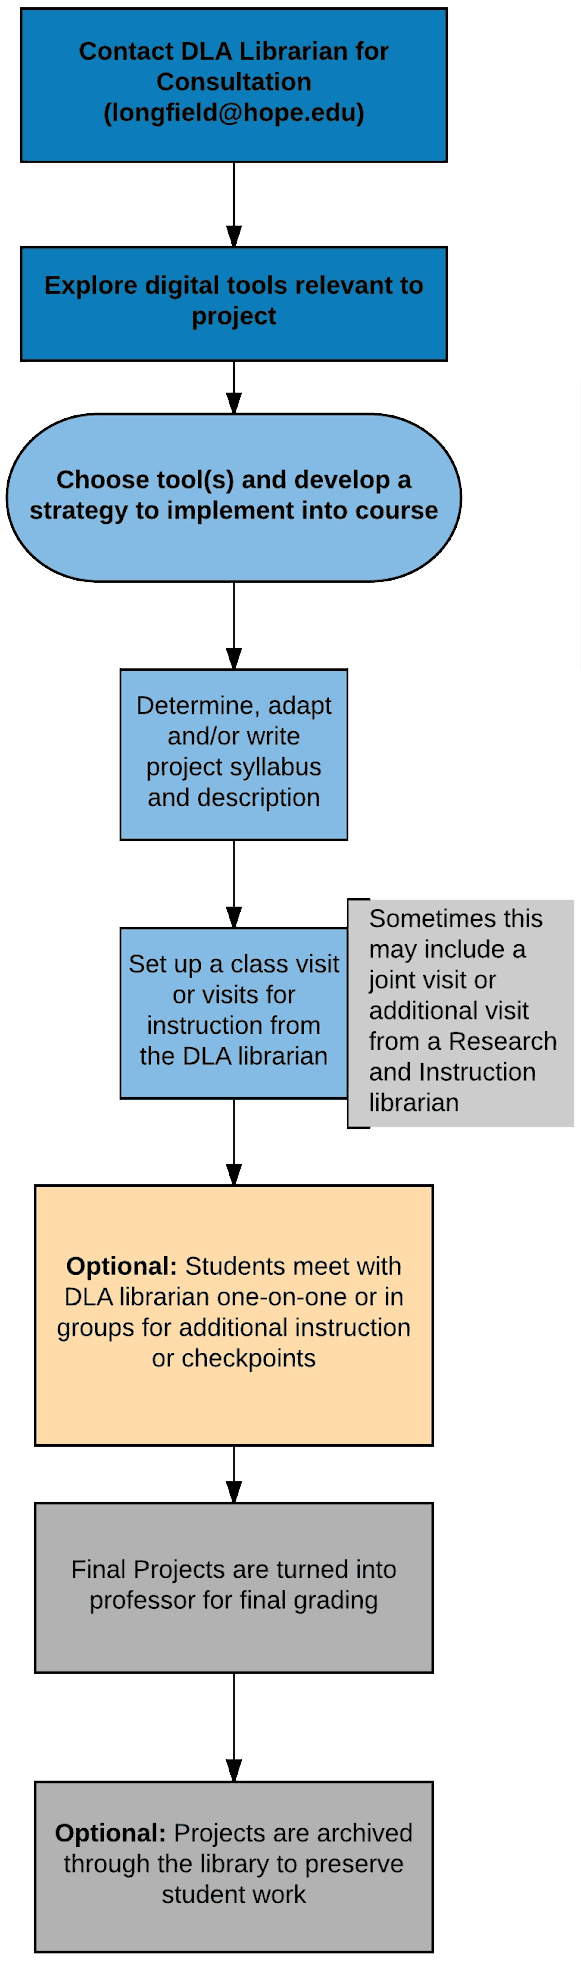 Flowchart showing the recommended steps in a digital project